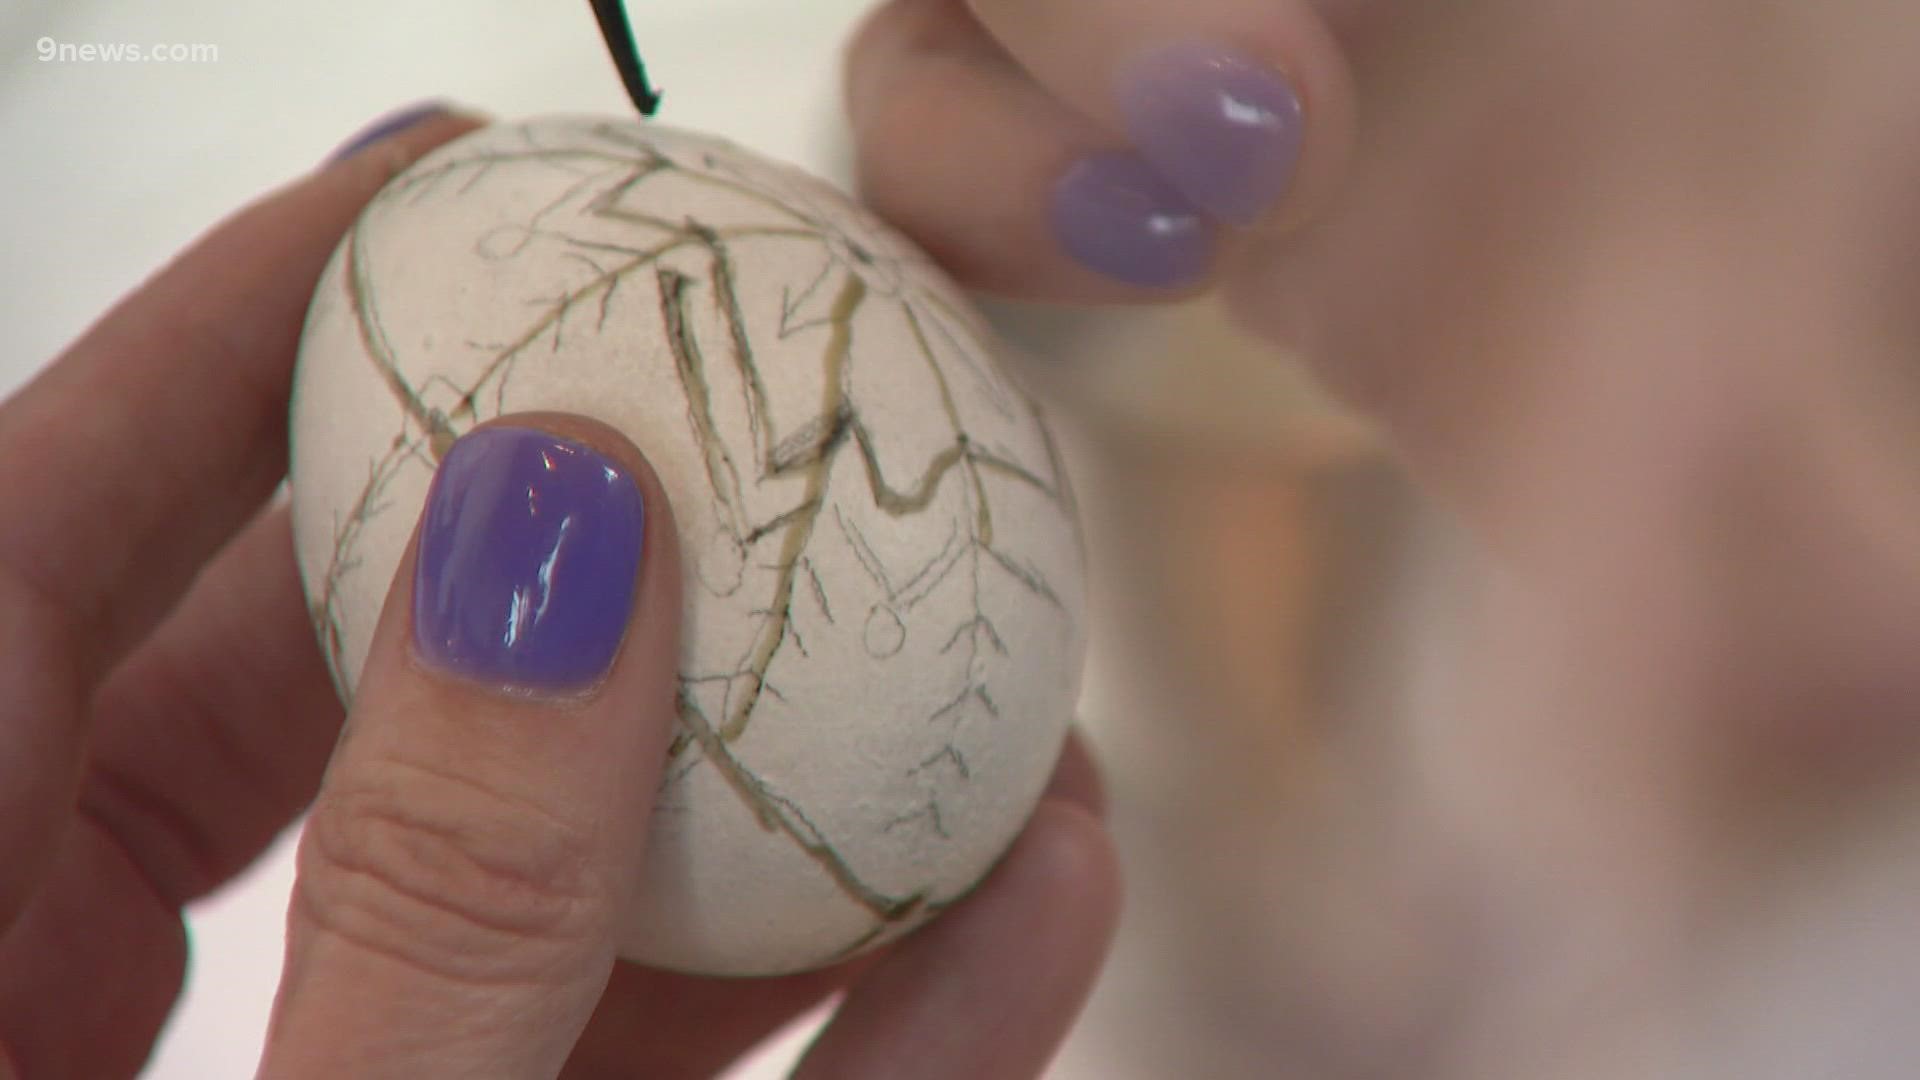 This year, Maria Sheets is using her Easter egg art class as an opportunity to help Ukrainians who have been forced to leave their homes.